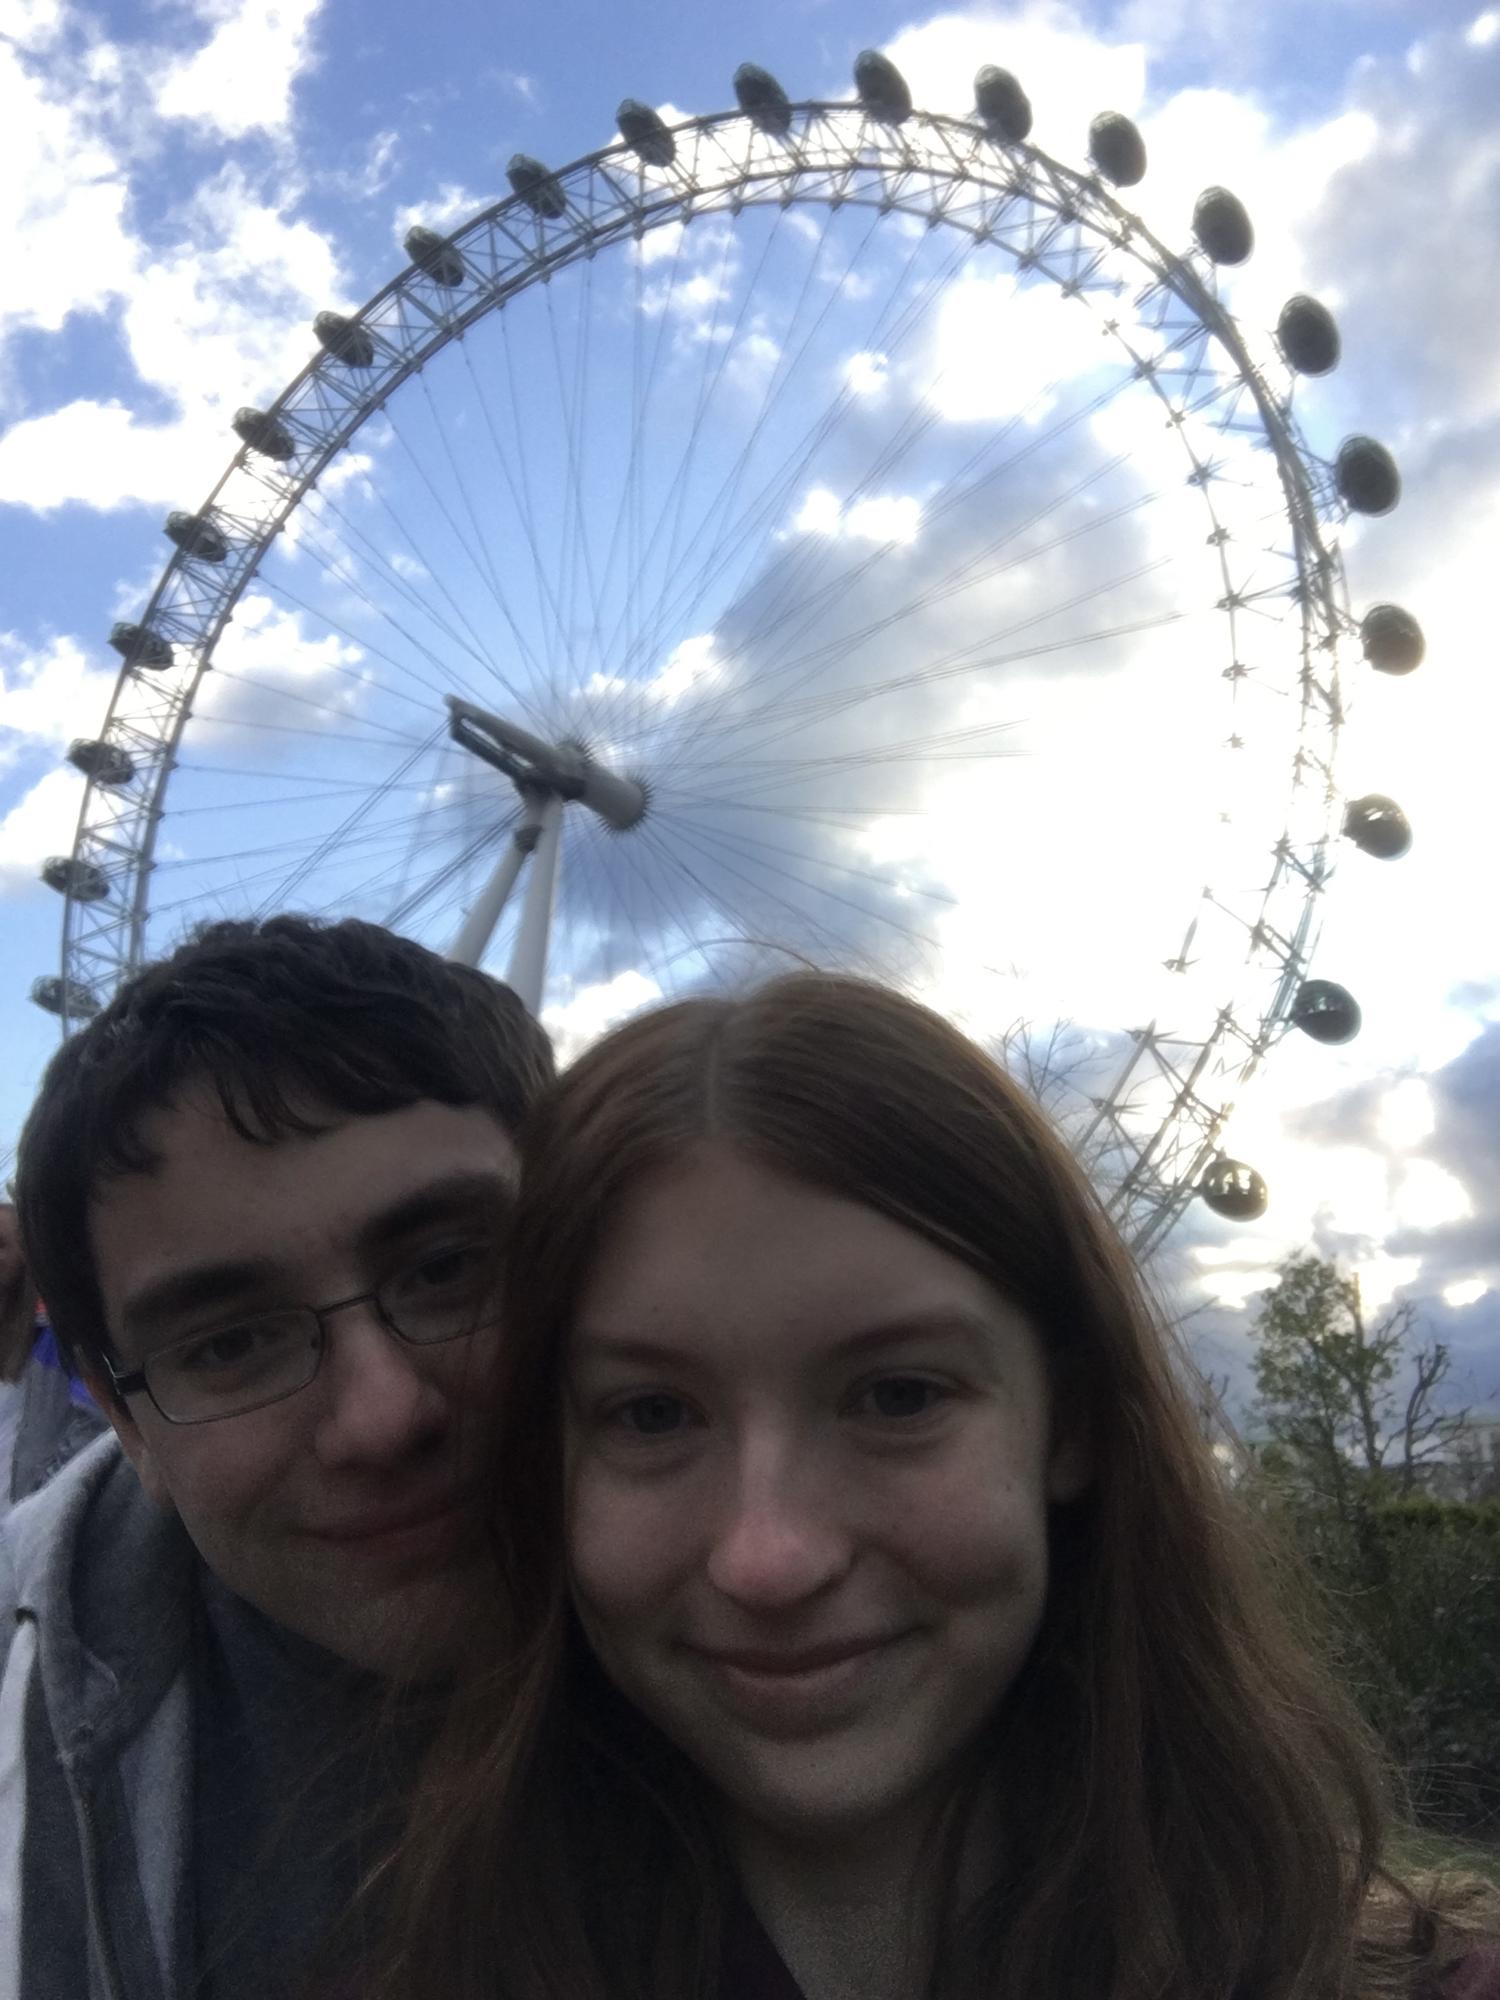 April 16th, 2016: Celebrating Leah’s 17th birthday exhausted from a redeye flight in front of the London Eye.